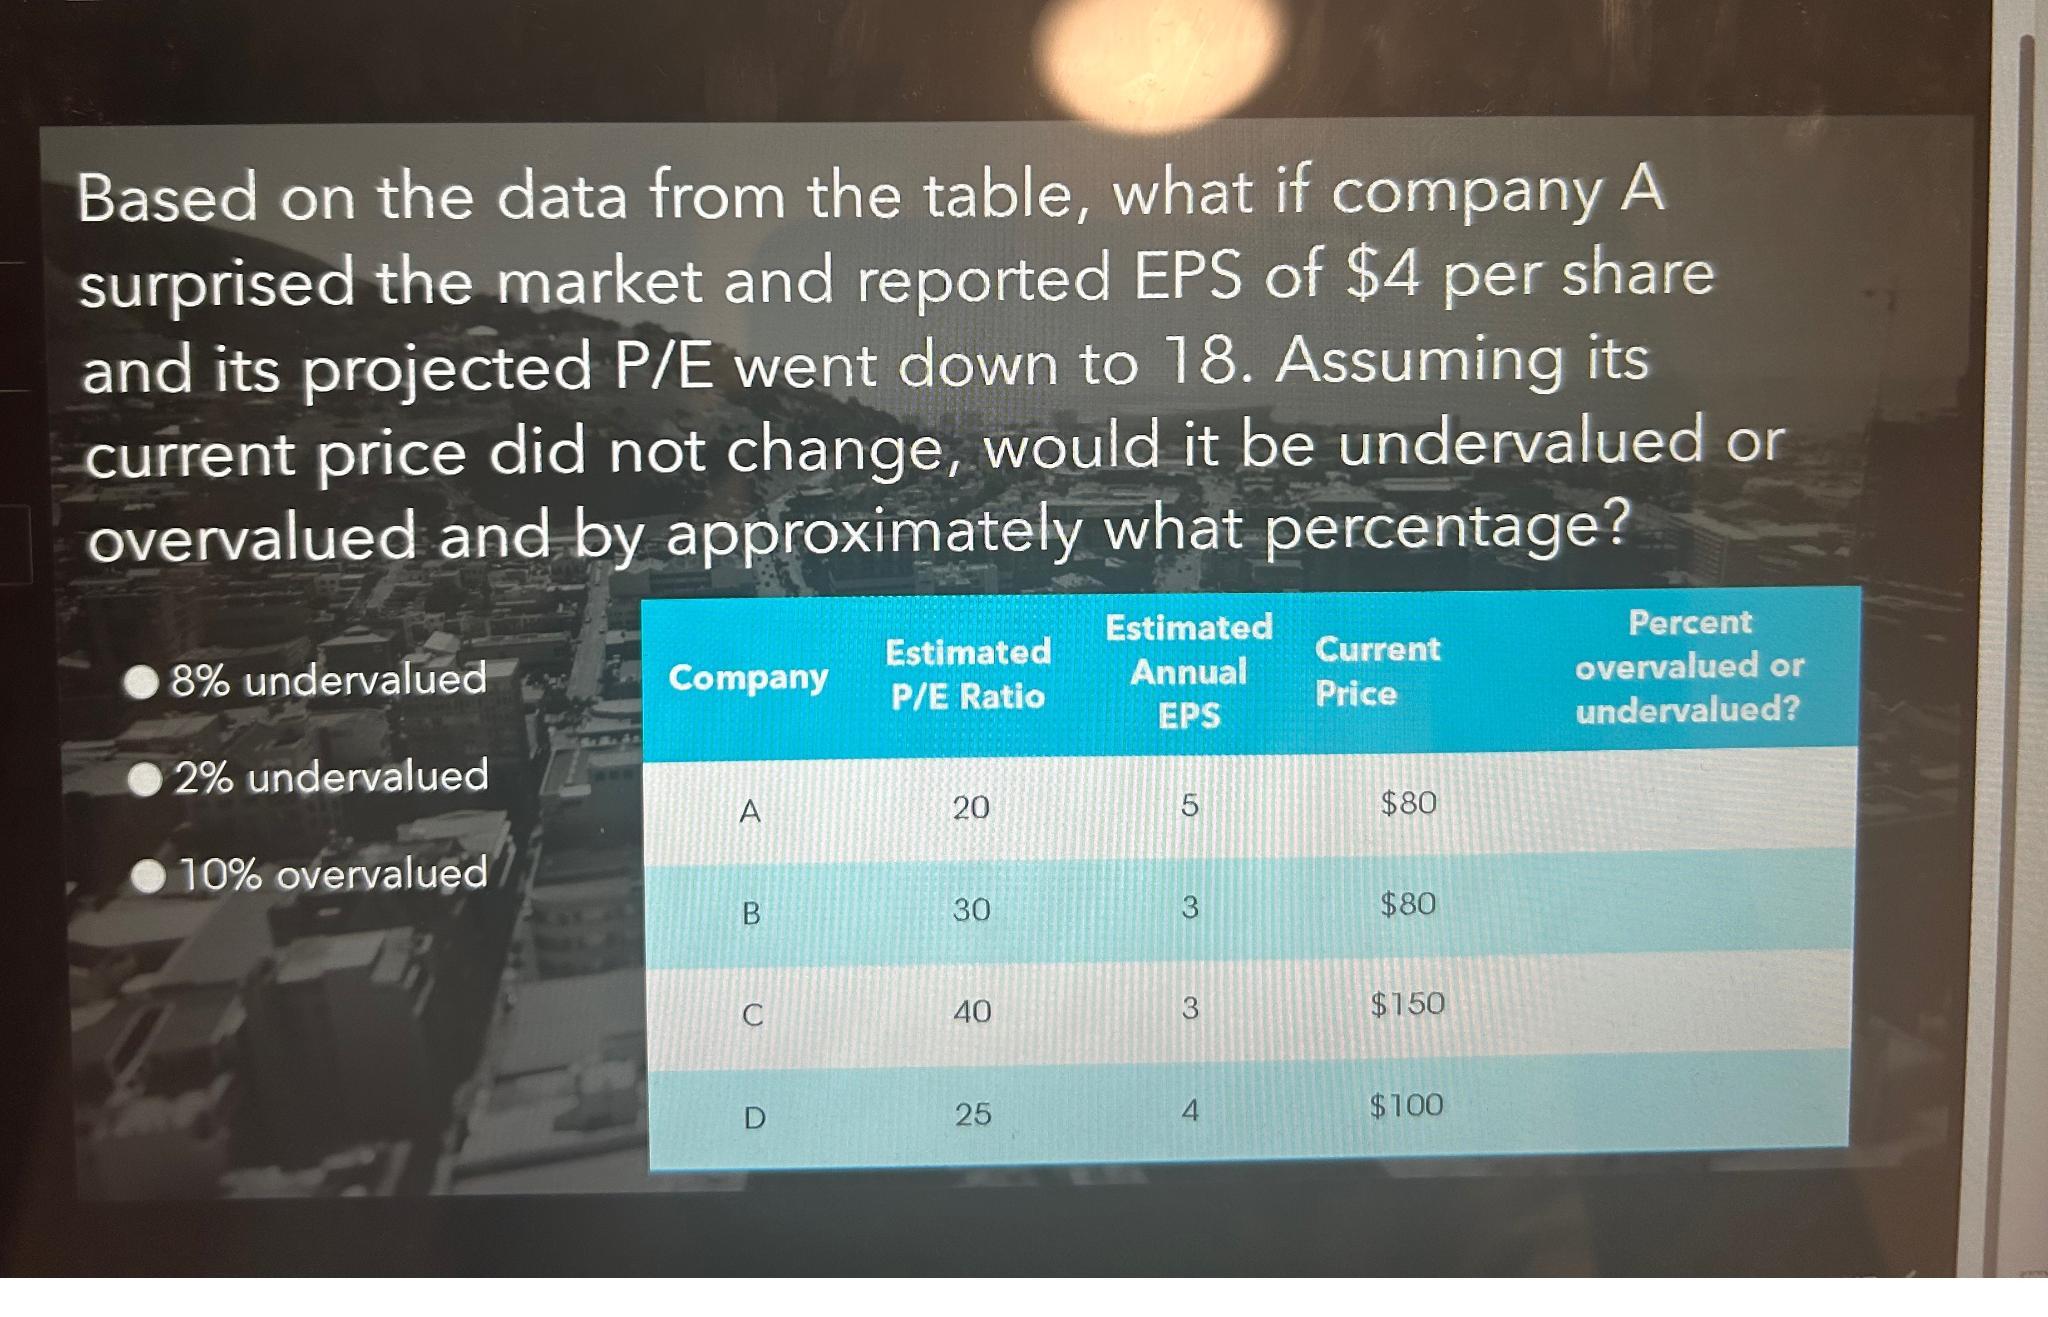 Based on the data from the table, what if company A surprised the market and reported EPS of $4 per share and